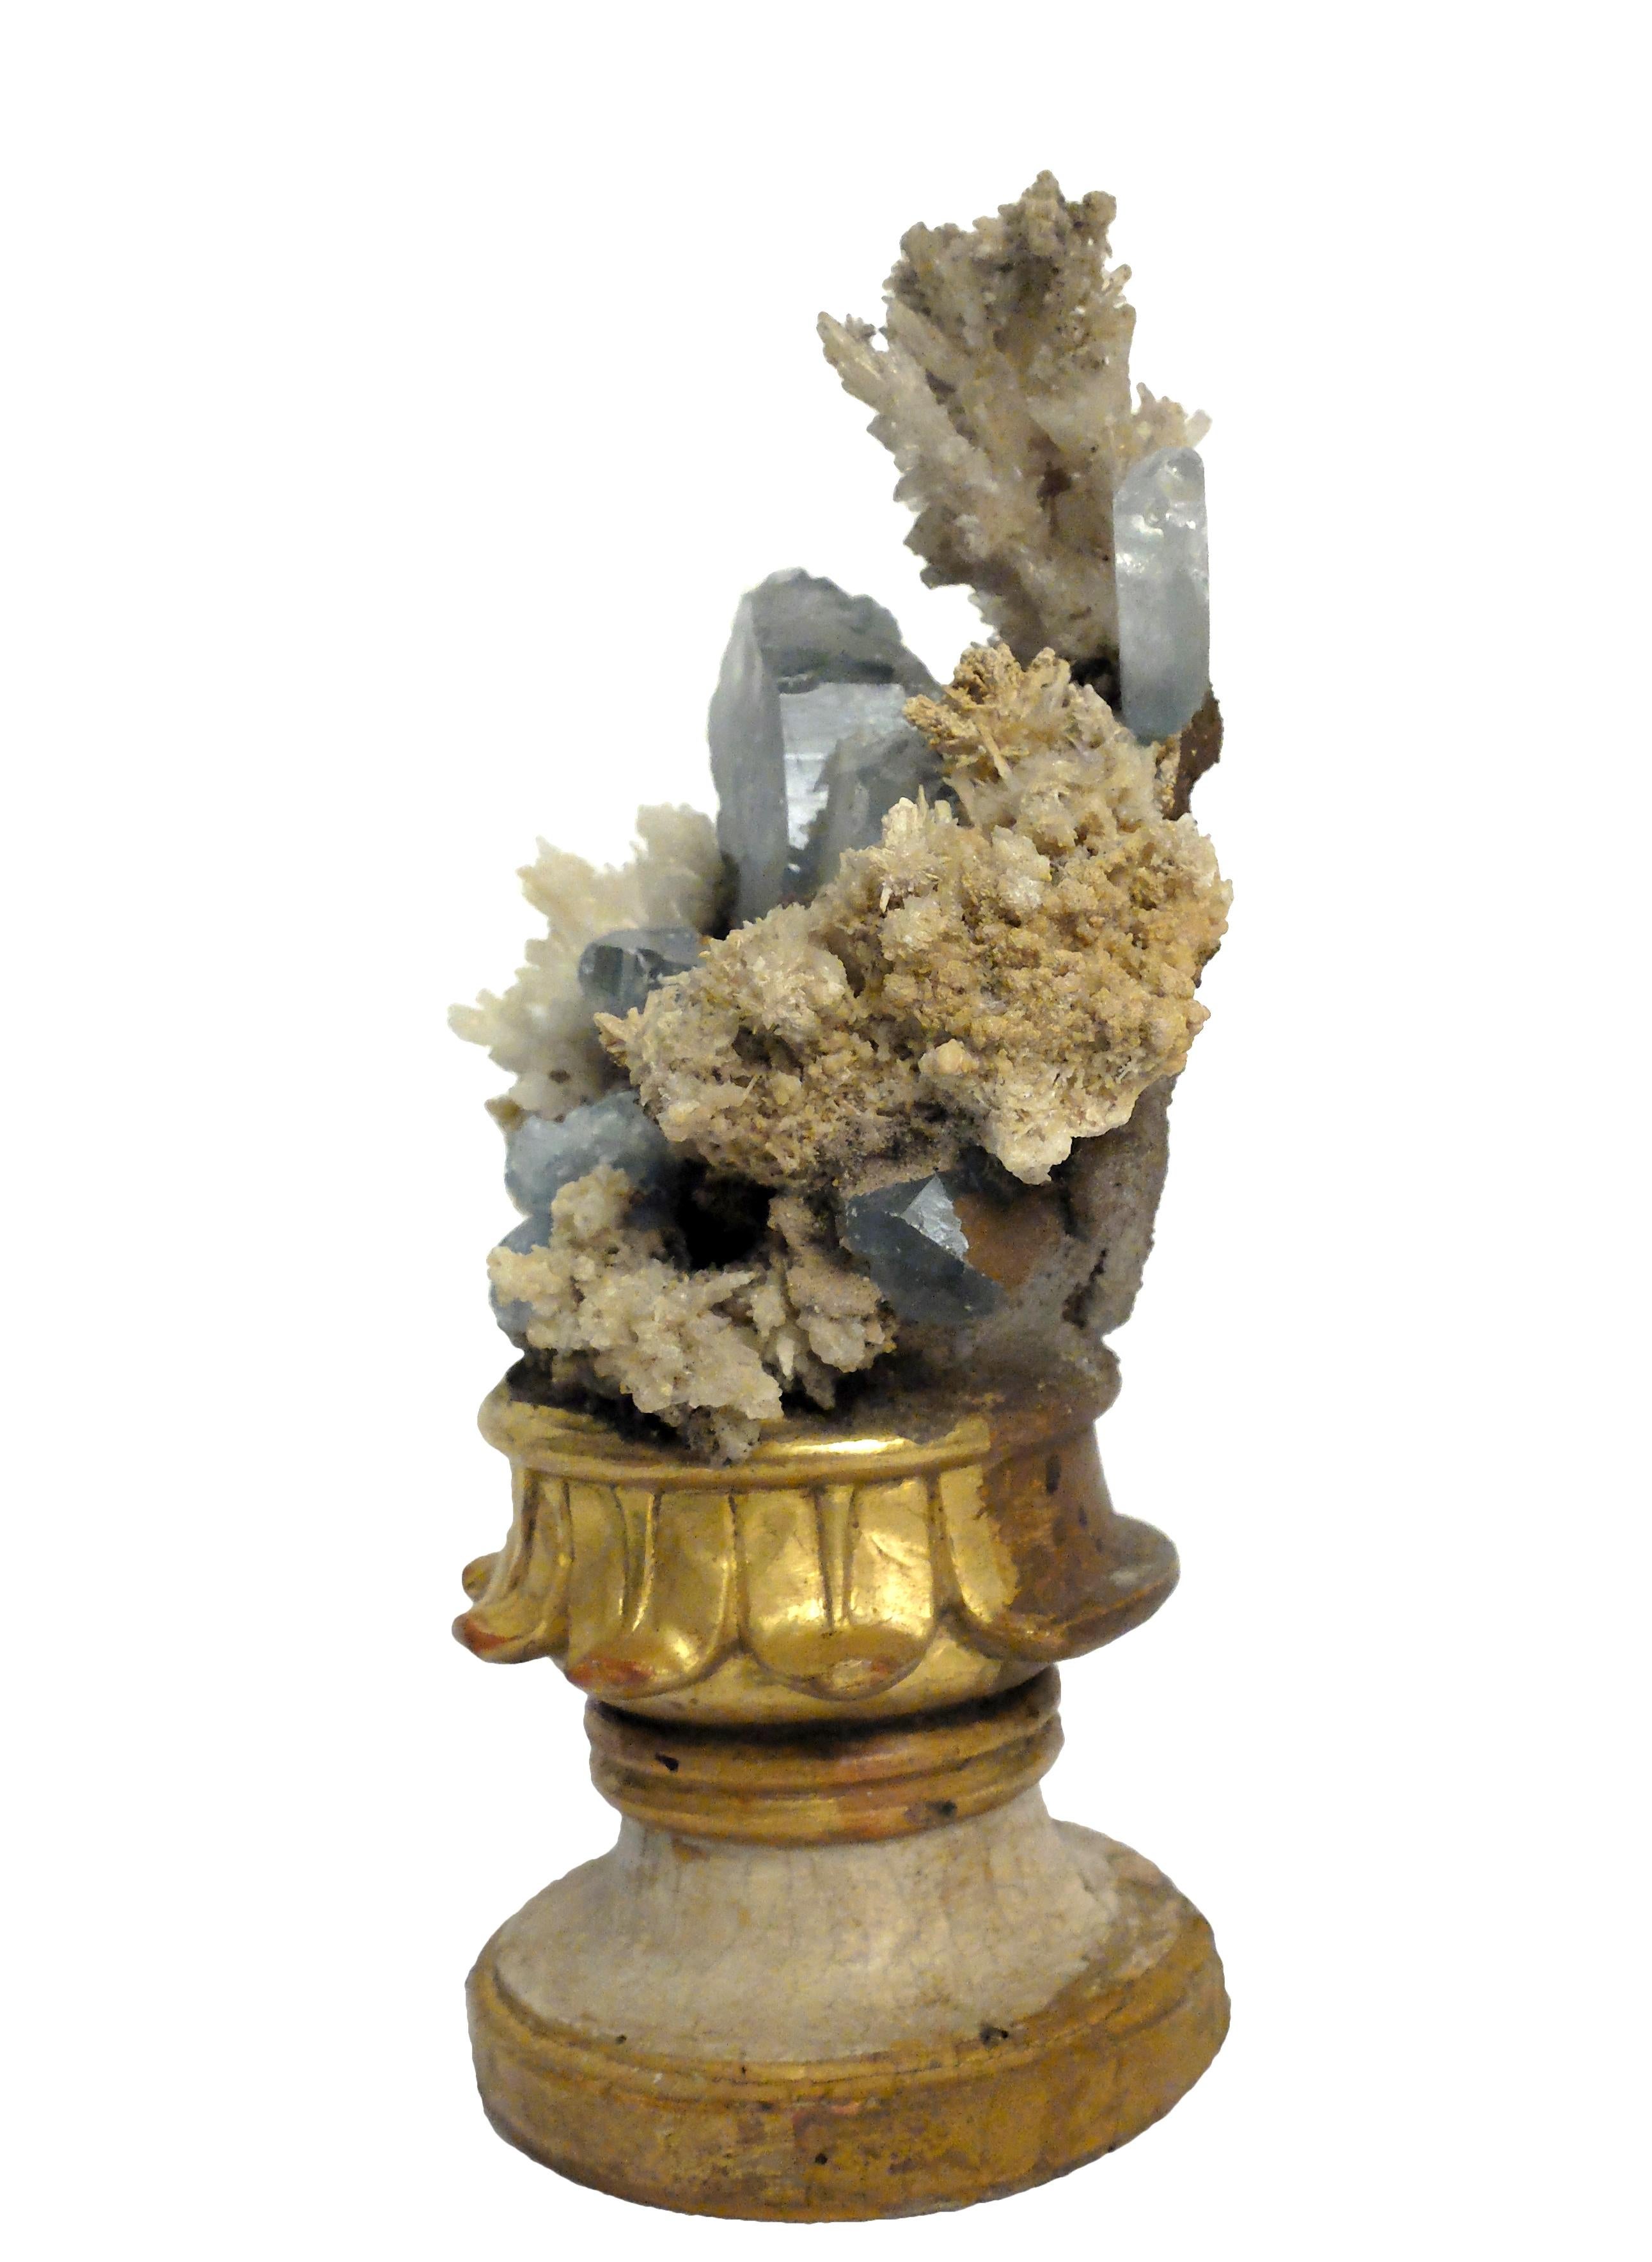 A Naturalia mineral specimen: A composition of Celestite or Celestine and Calcite flowers crystals druze, mounted over guild-plated and lacquered wooden base on a vase shape with leaves decoration.